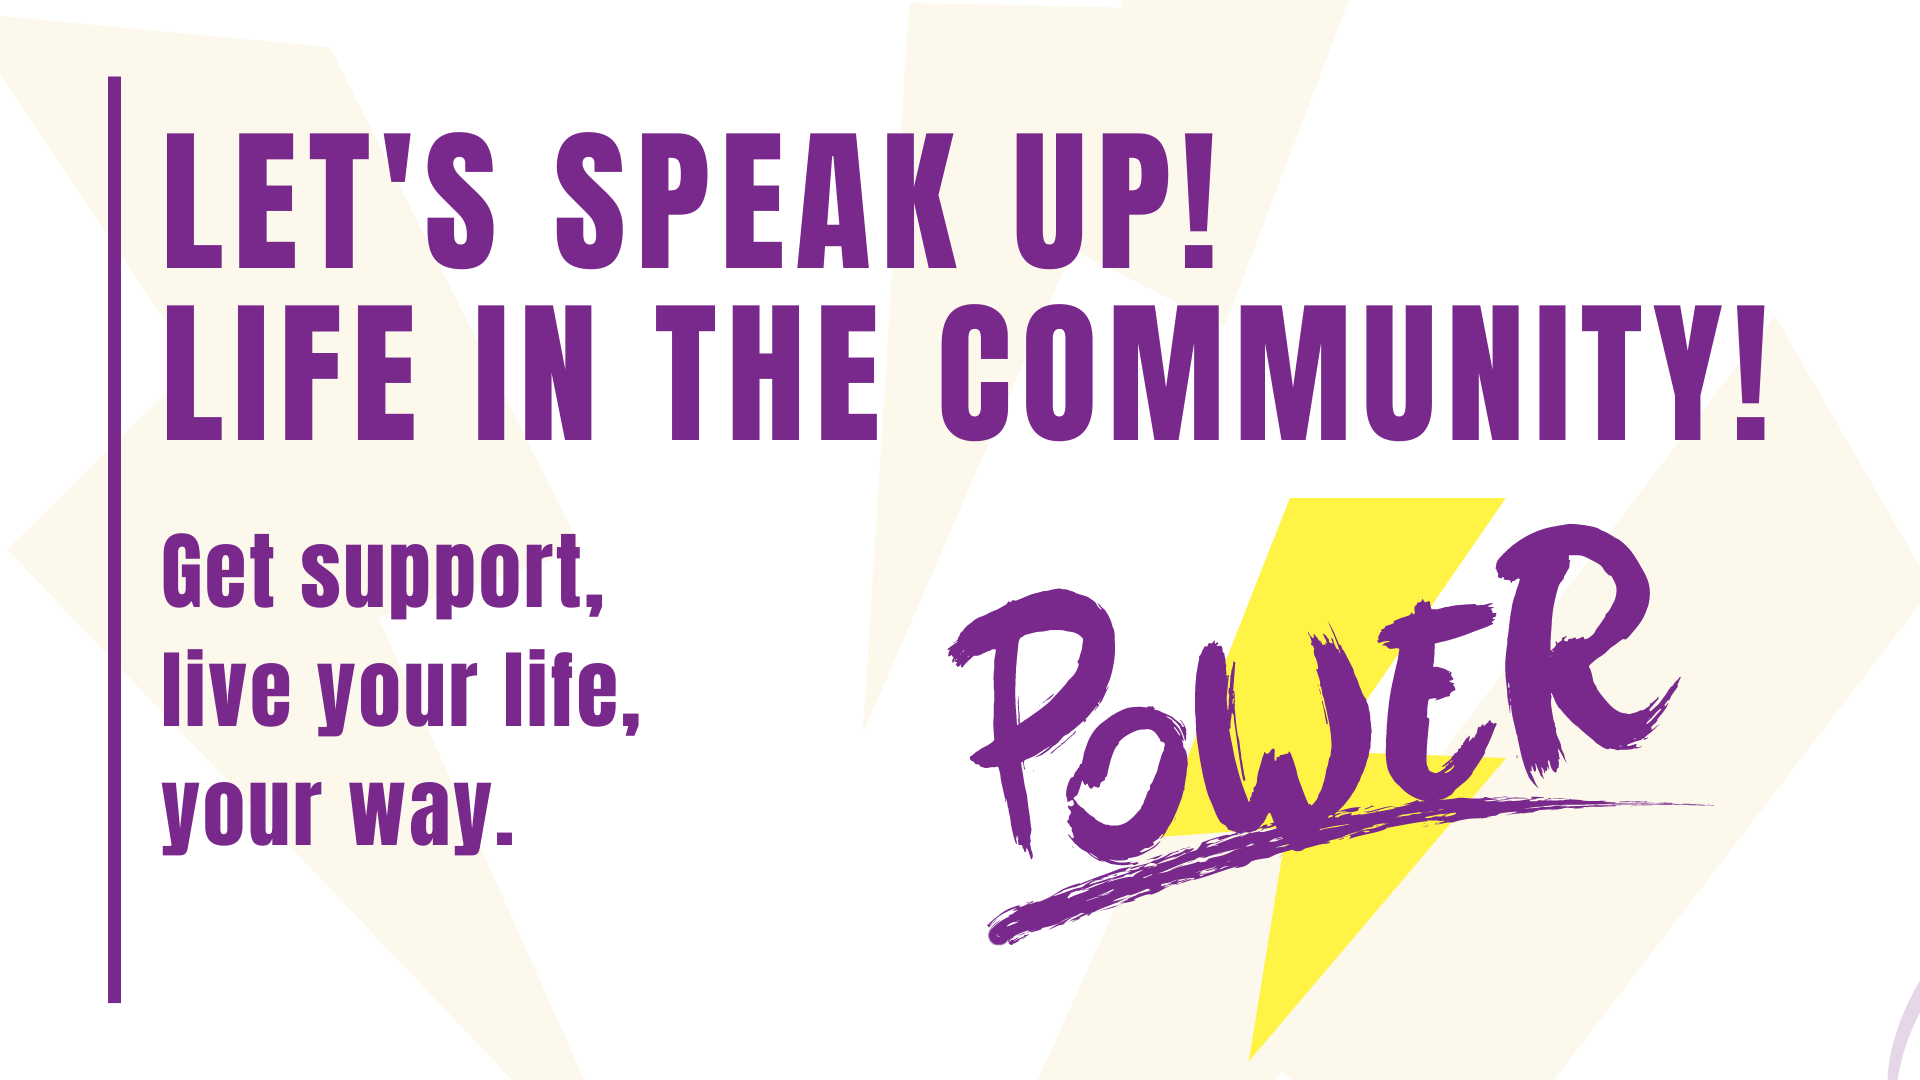 Banner with shadows of lightning bolts in the background. Text reads: Speak up for community living! Get support, live your life, your way. There is a yellow lightning behind the word Power in purple, to the right of the other text.